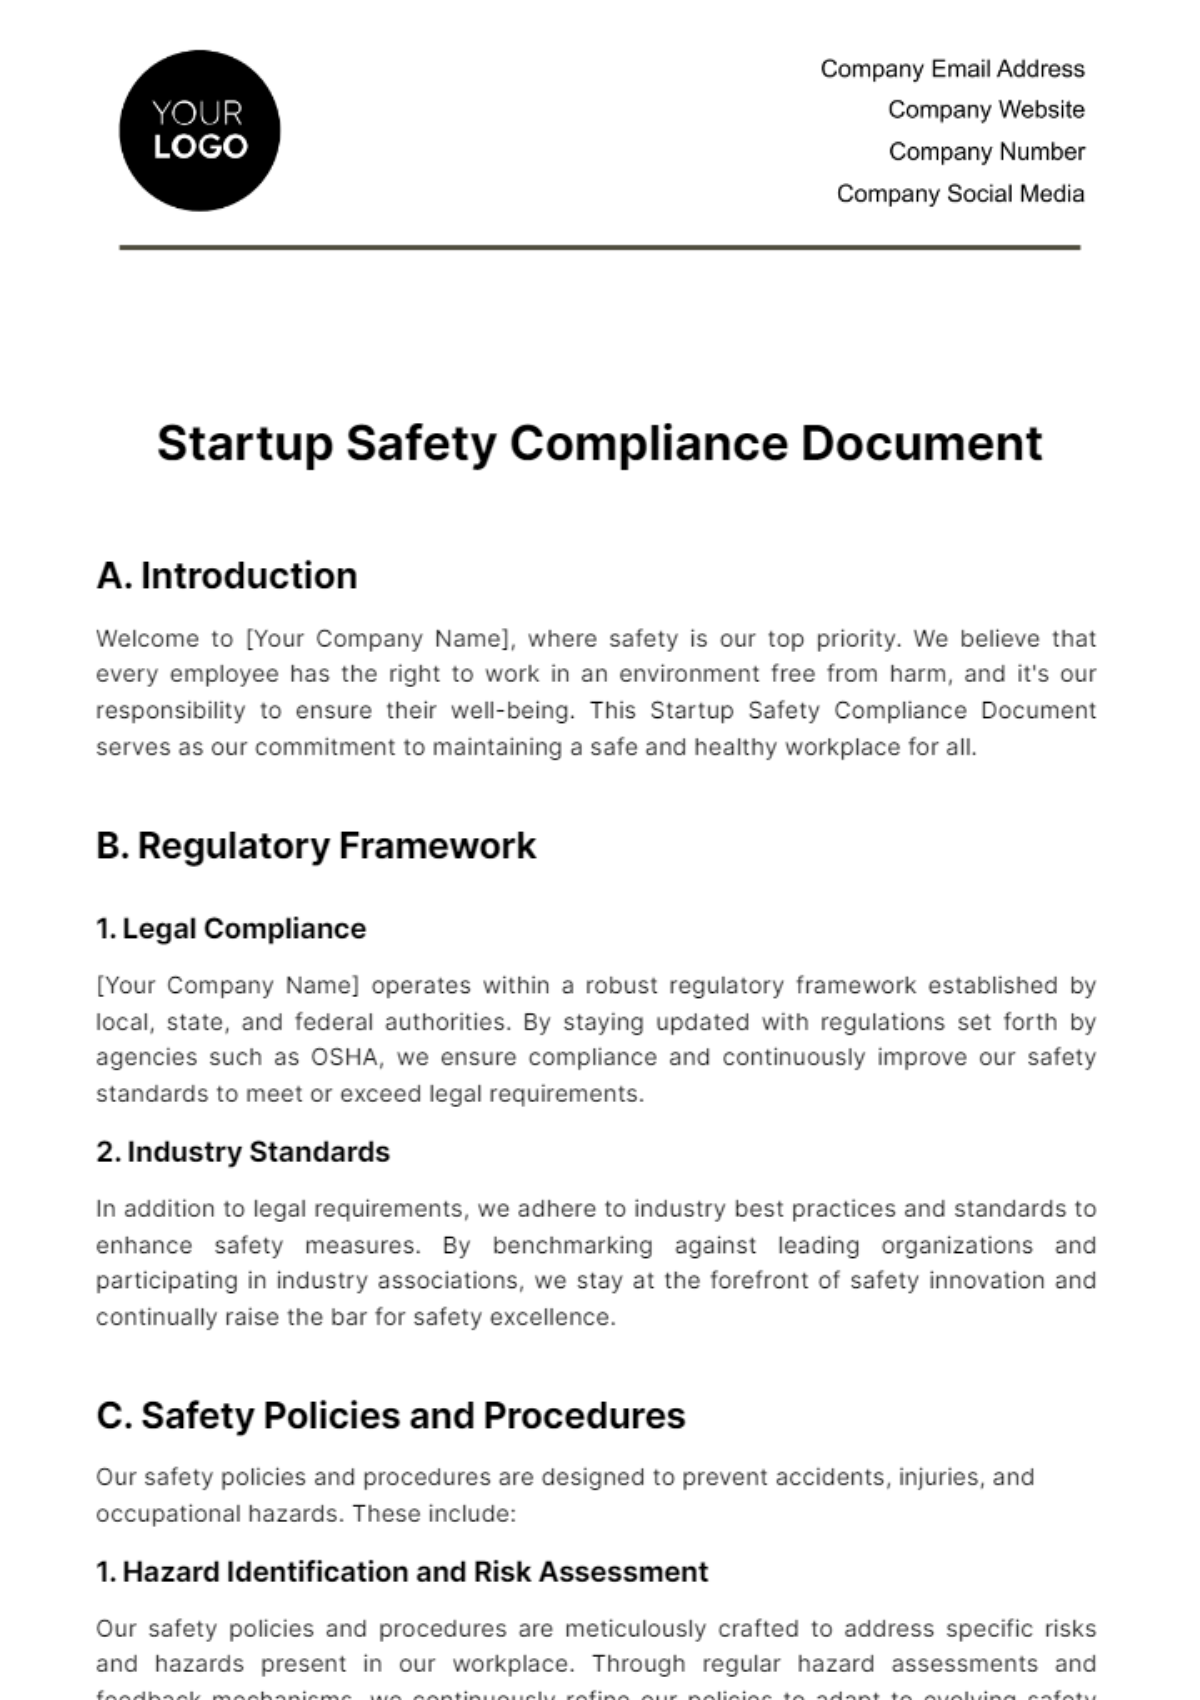 Startup Safety Compliance Document Template